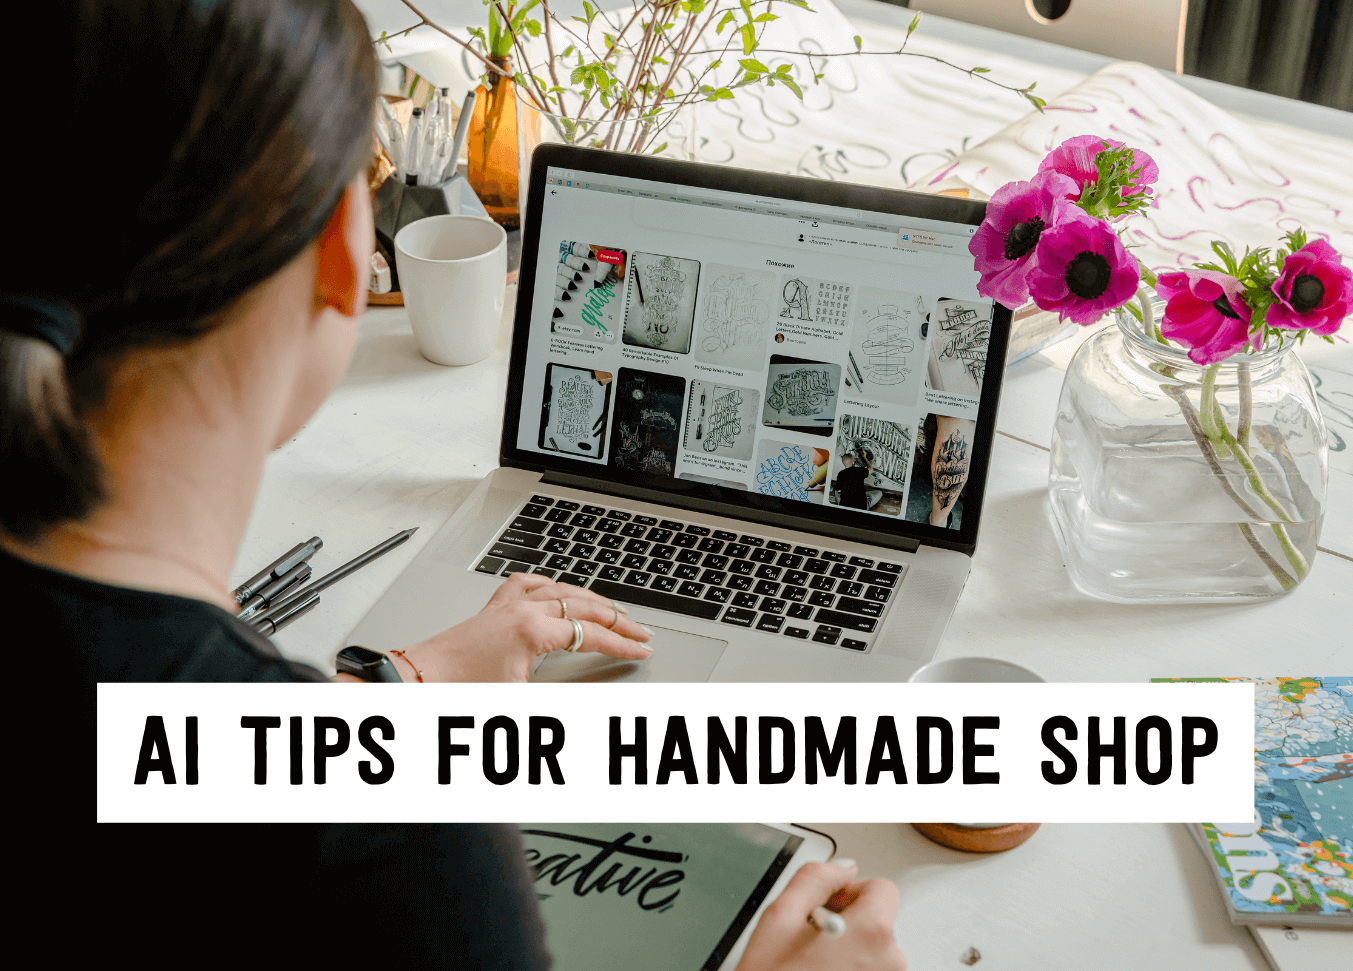 AI tips for handmade shop | Tizzit.co - start and grow a successful handmade business